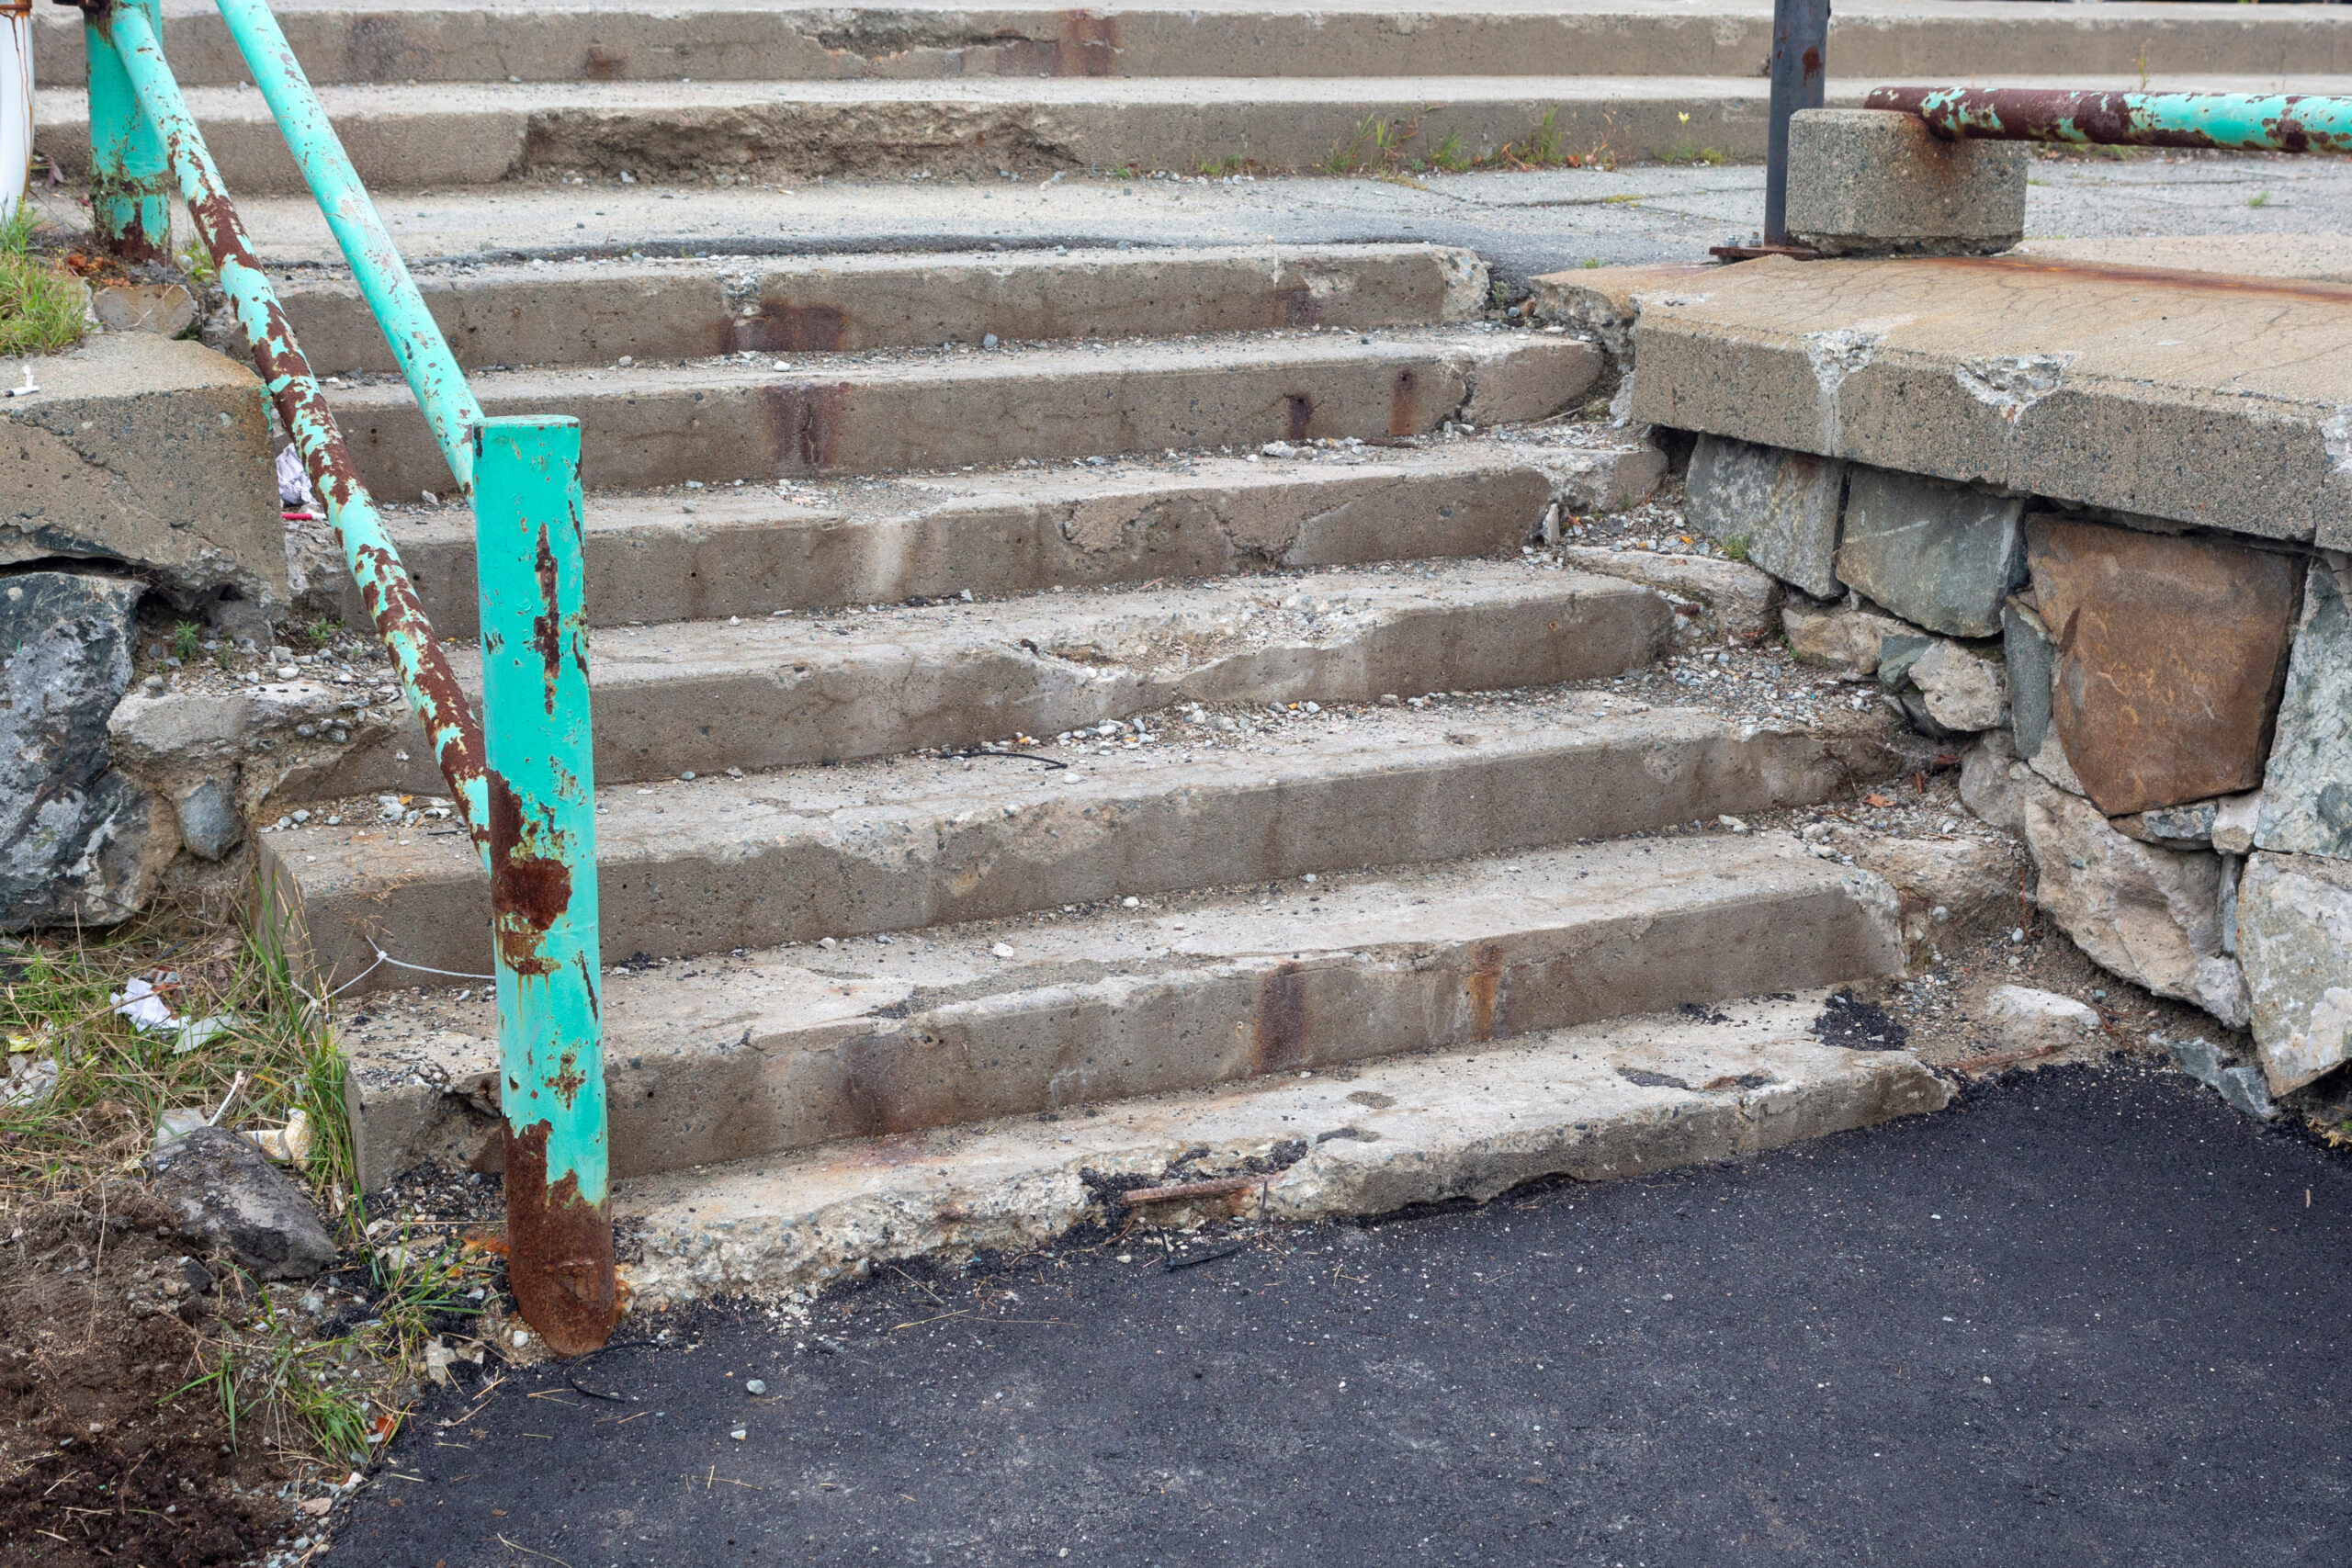 Easy Ways to Fix Loose or Broken Stone Steps